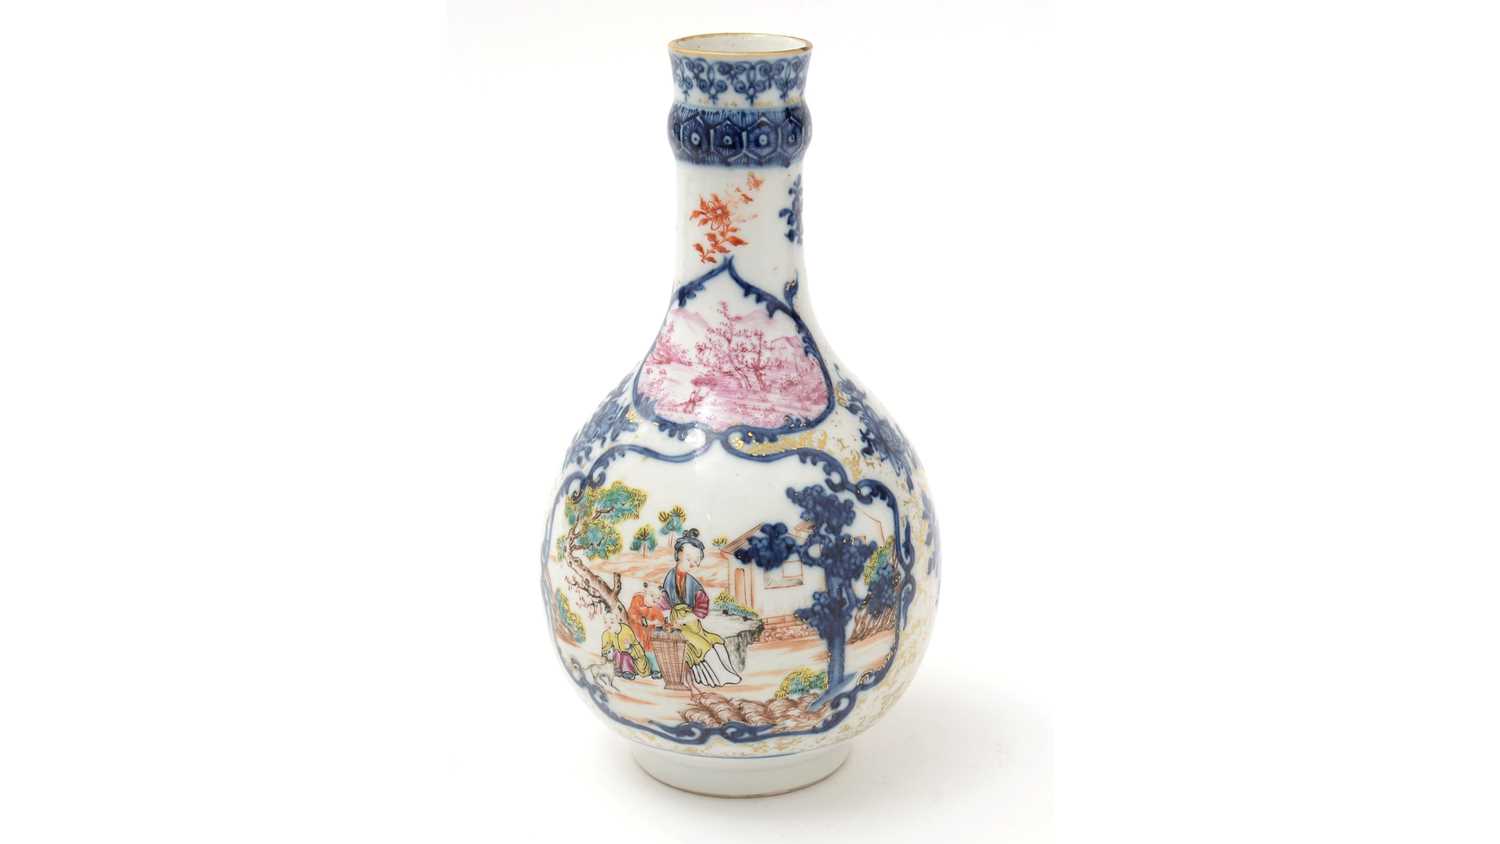 Lot 635 - A Chinese Guglet